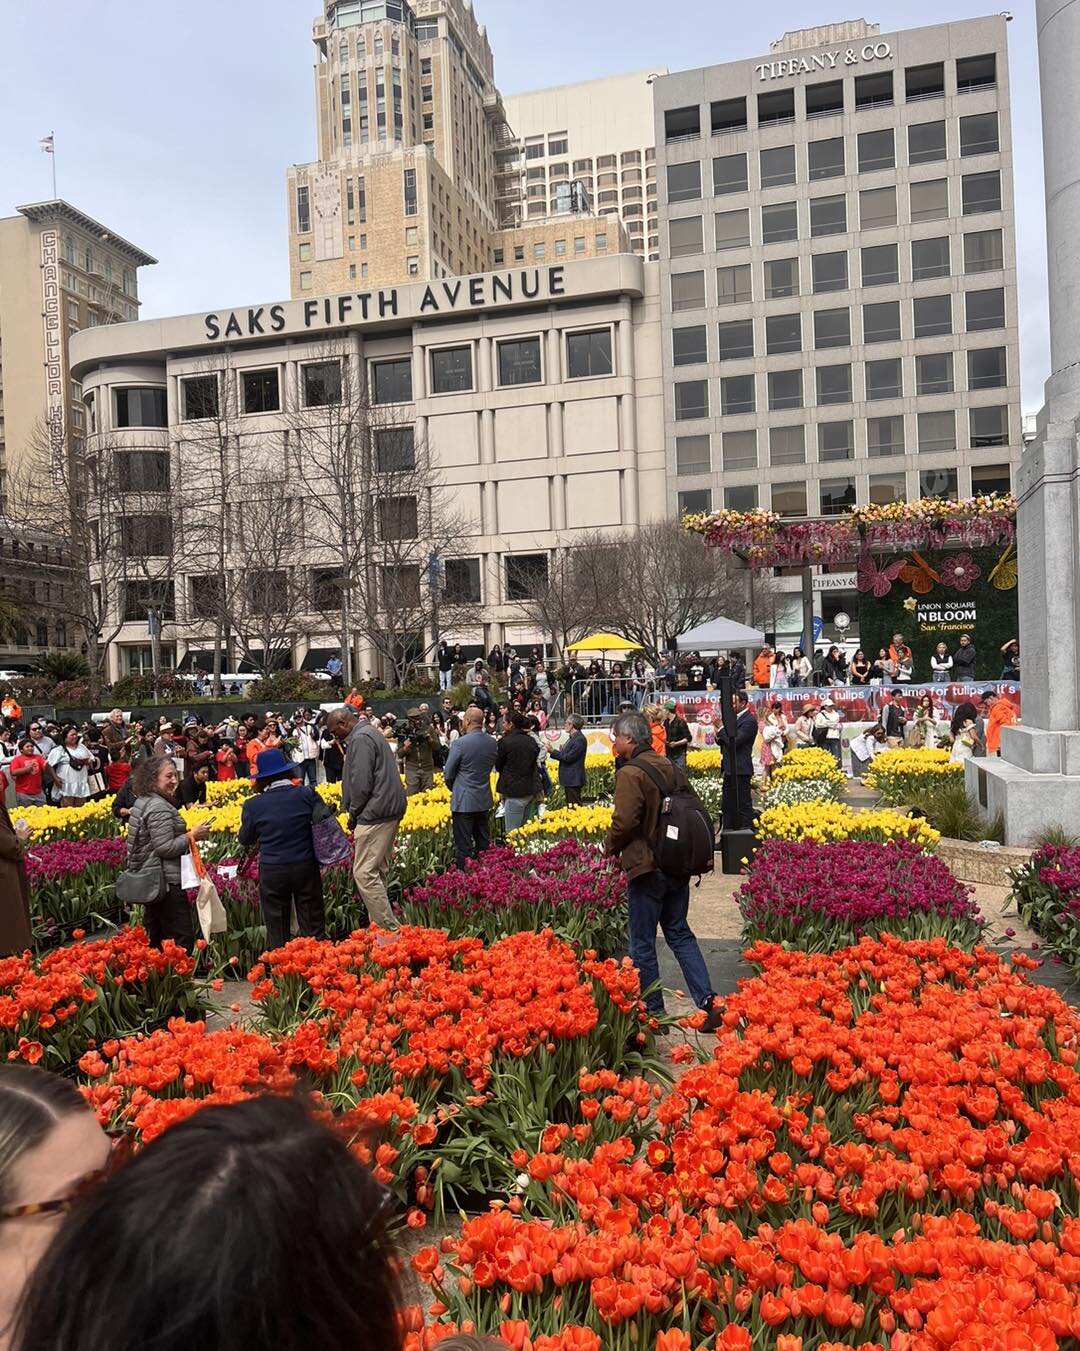 Last Saturday, the Sun Valley Team had a wonderful trip to San Francisco for Tulip Day! Thousand of people flocked to Union Square to pick our tulips with friends and family. Thank you SF for an amazing experience and the opportunity to share our tul